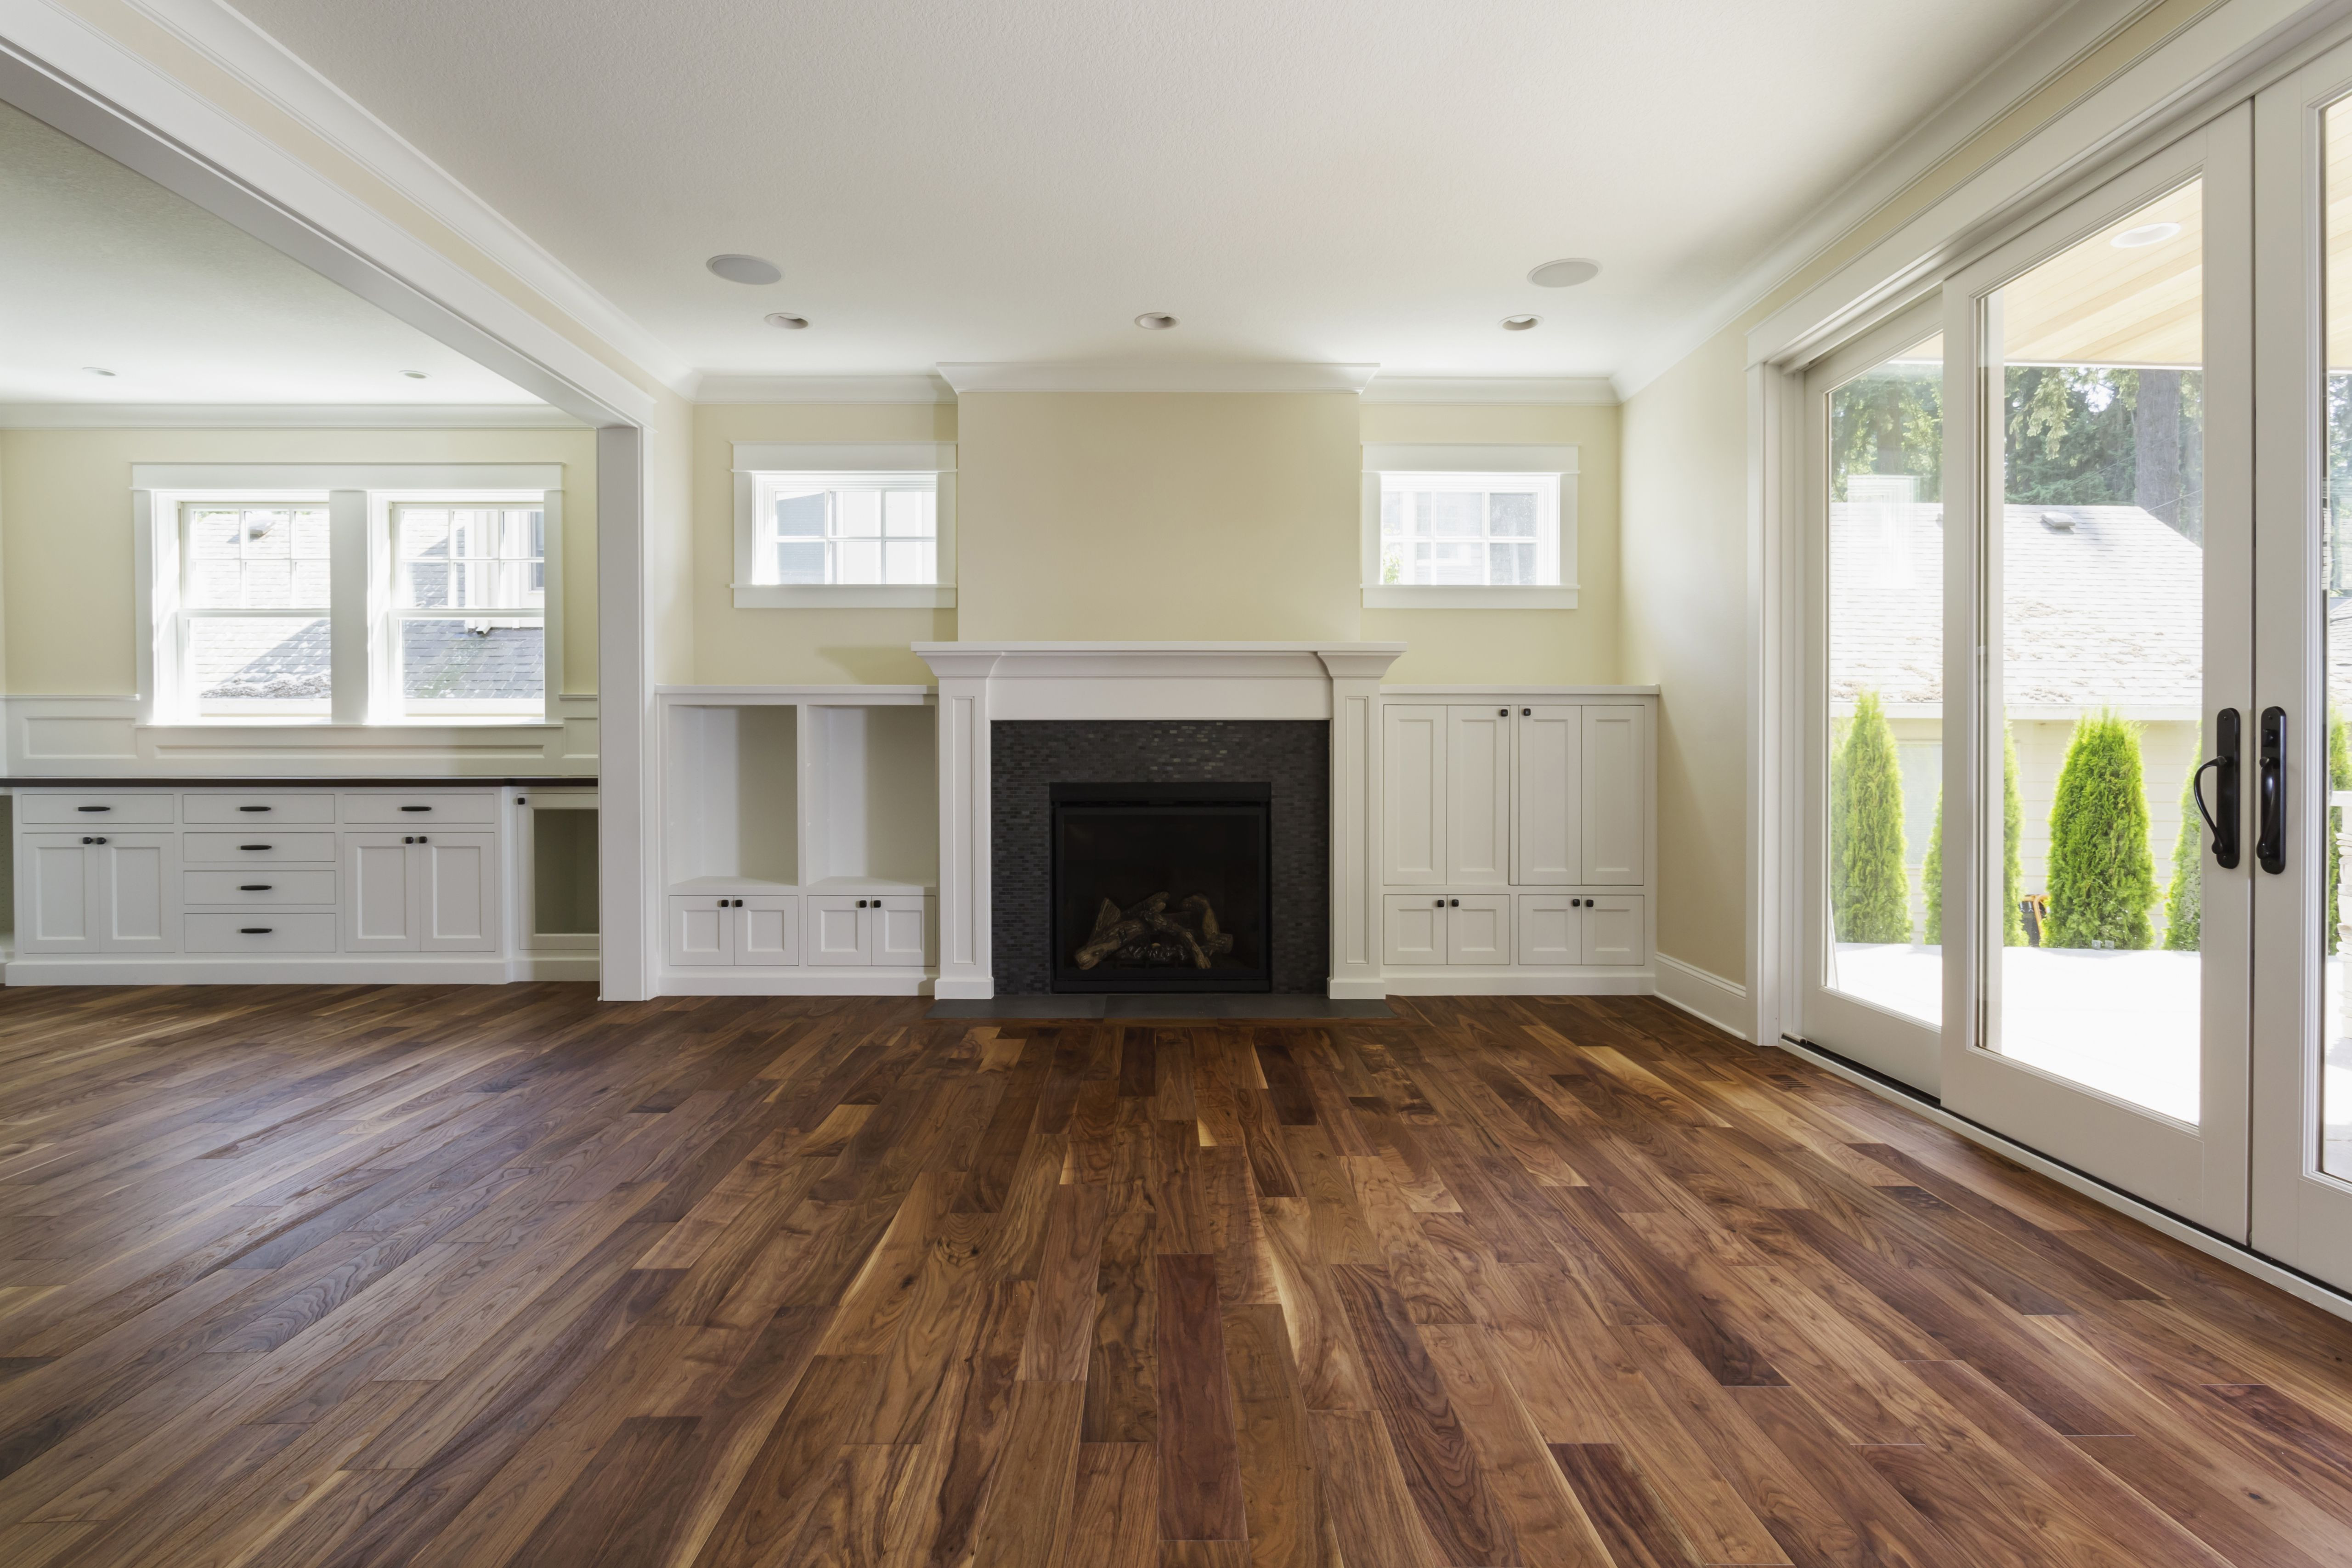 19 Unique Discount Hardwood Flooring atlanta 2024 free download discount hardwood flooring atlanta of the pros and cons of prefinished hardwood flooring with fireplace and built in shelves in living room 482143011 57bef8e33df78cc16e035397